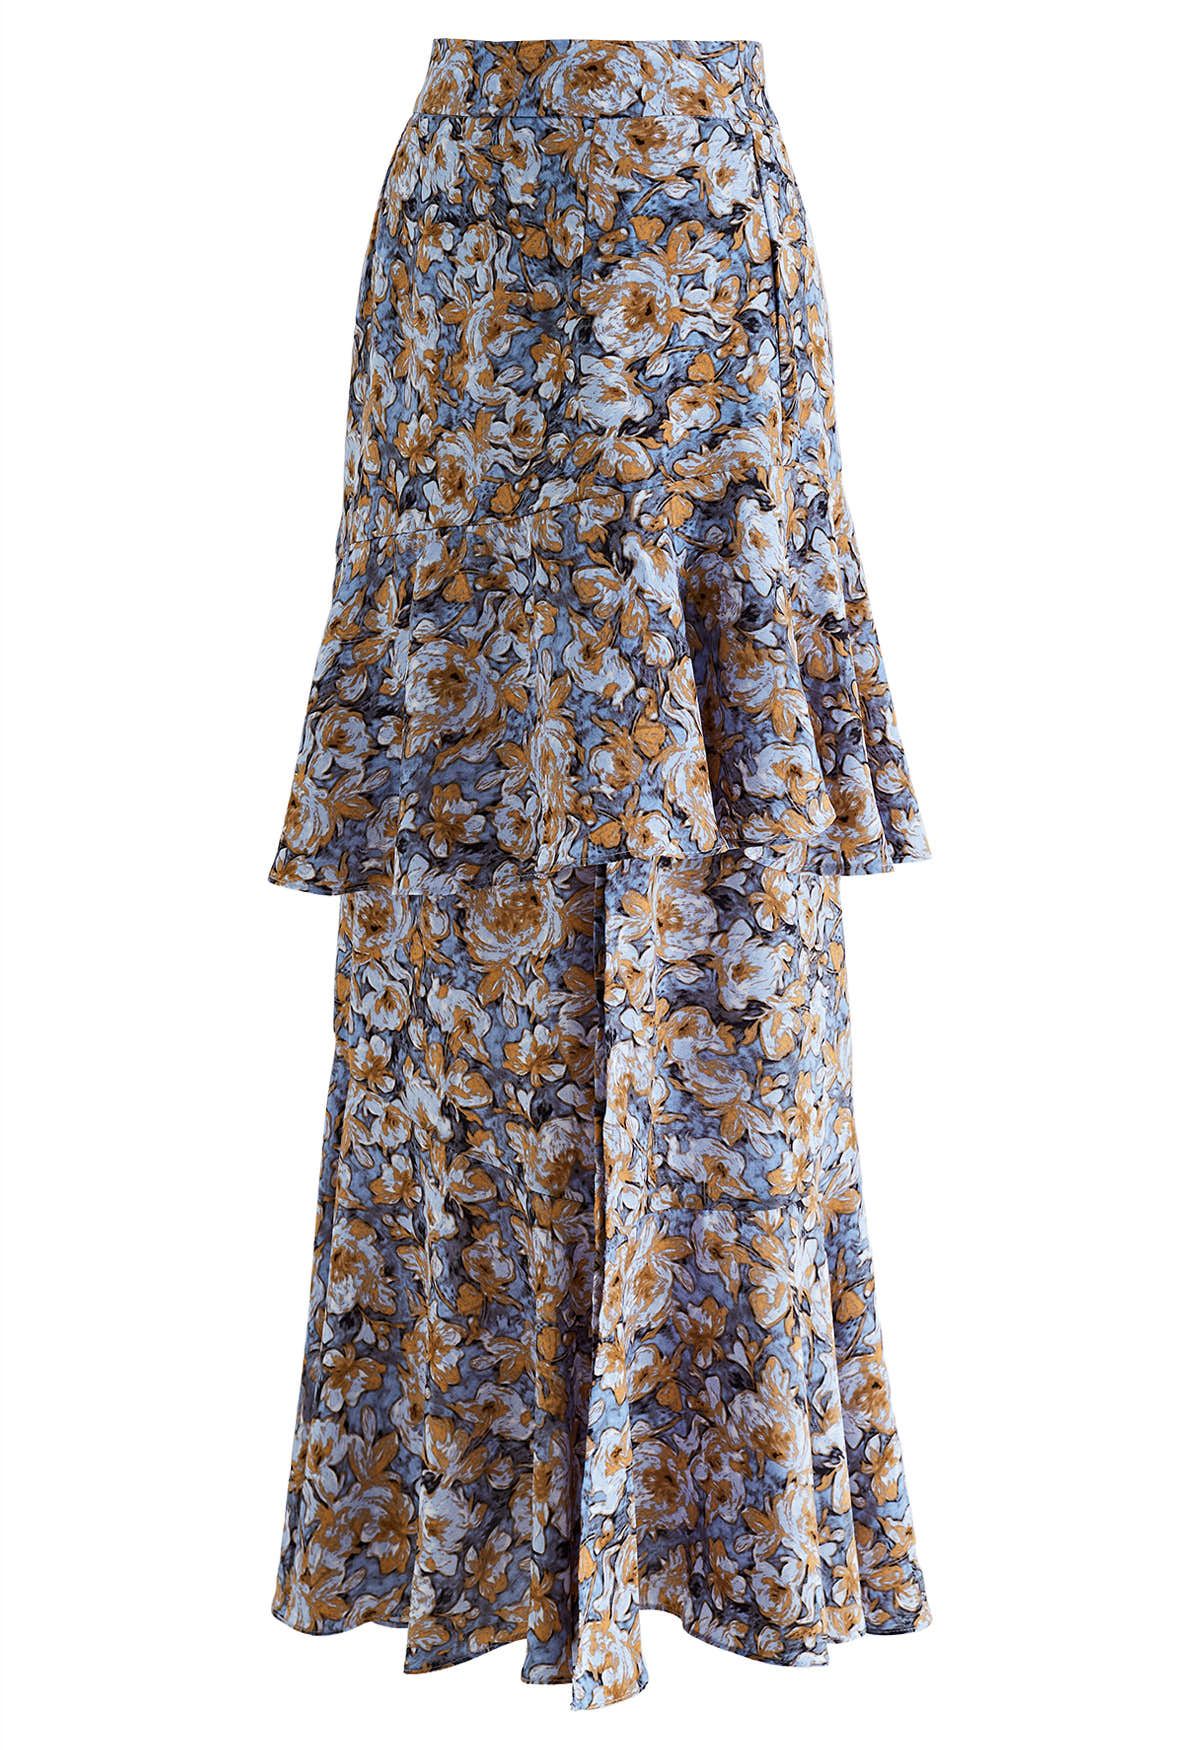 Floral Oil Painting Ruffle Maxi Skirt in Blue - Retro, Indie and Unique ...